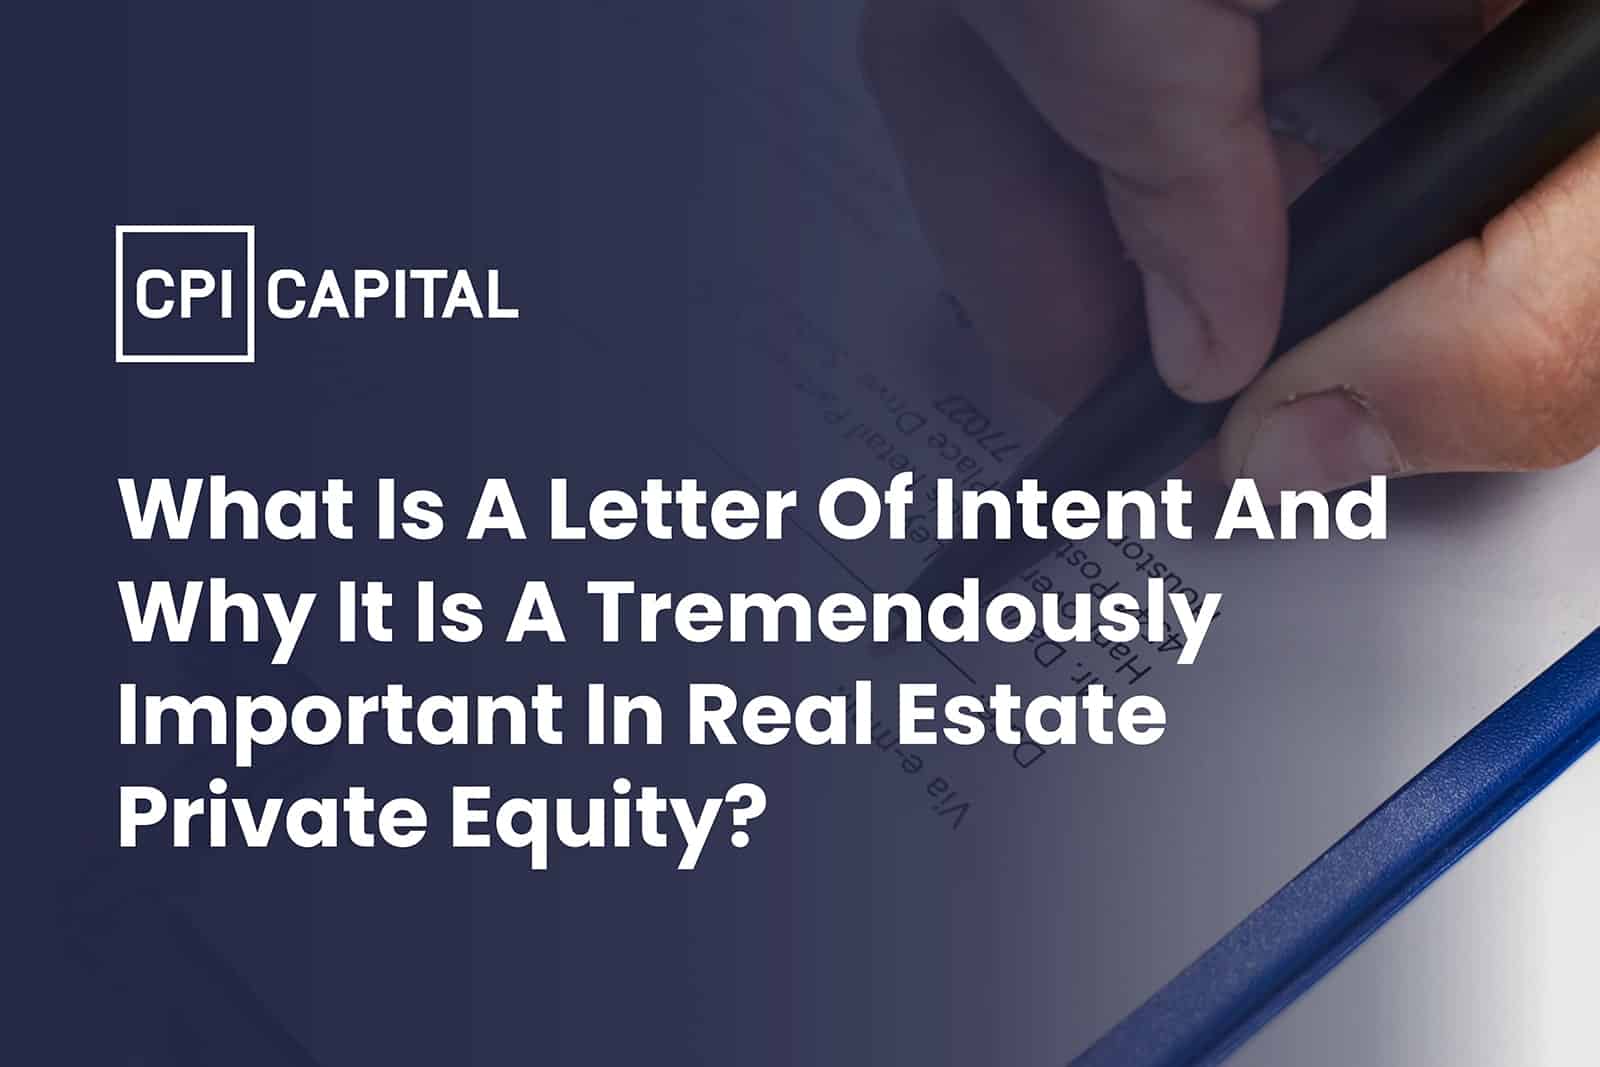 What is a Letter of Intent and why is it very important In Real Estate Private Equity?